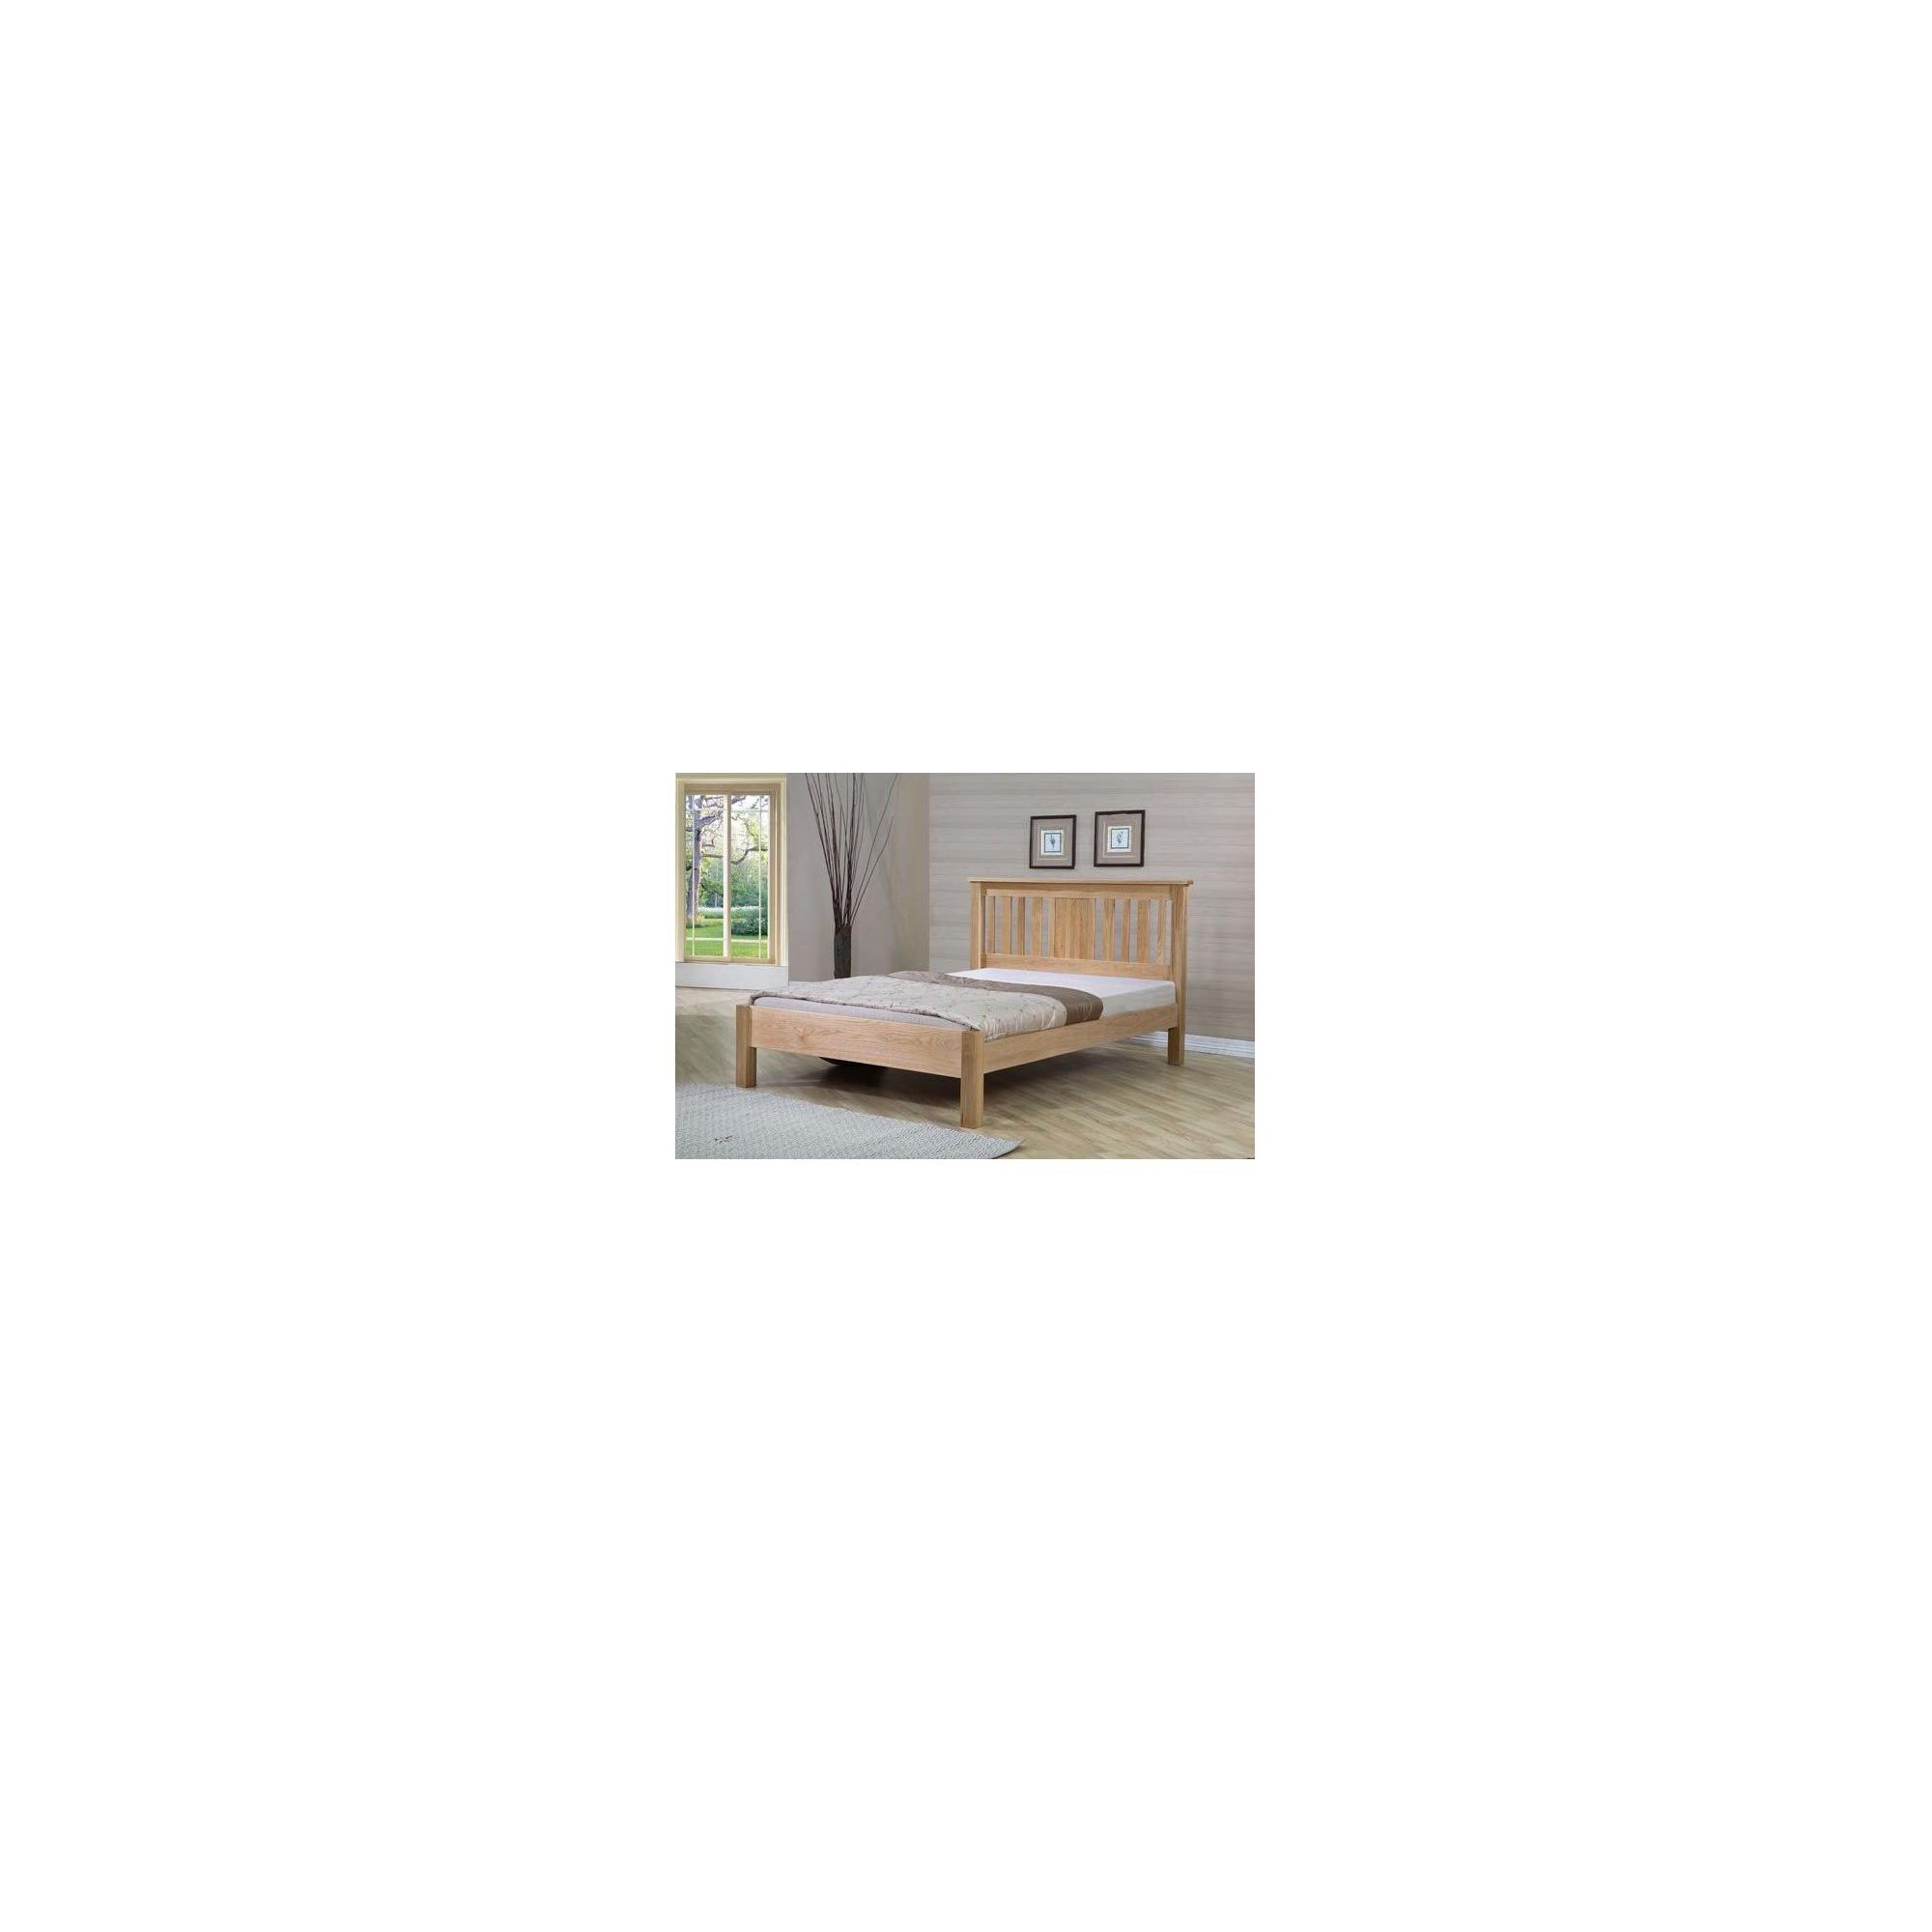 Sleepy Valley Oregon Bed - No Drawers - King at Tesco Direct